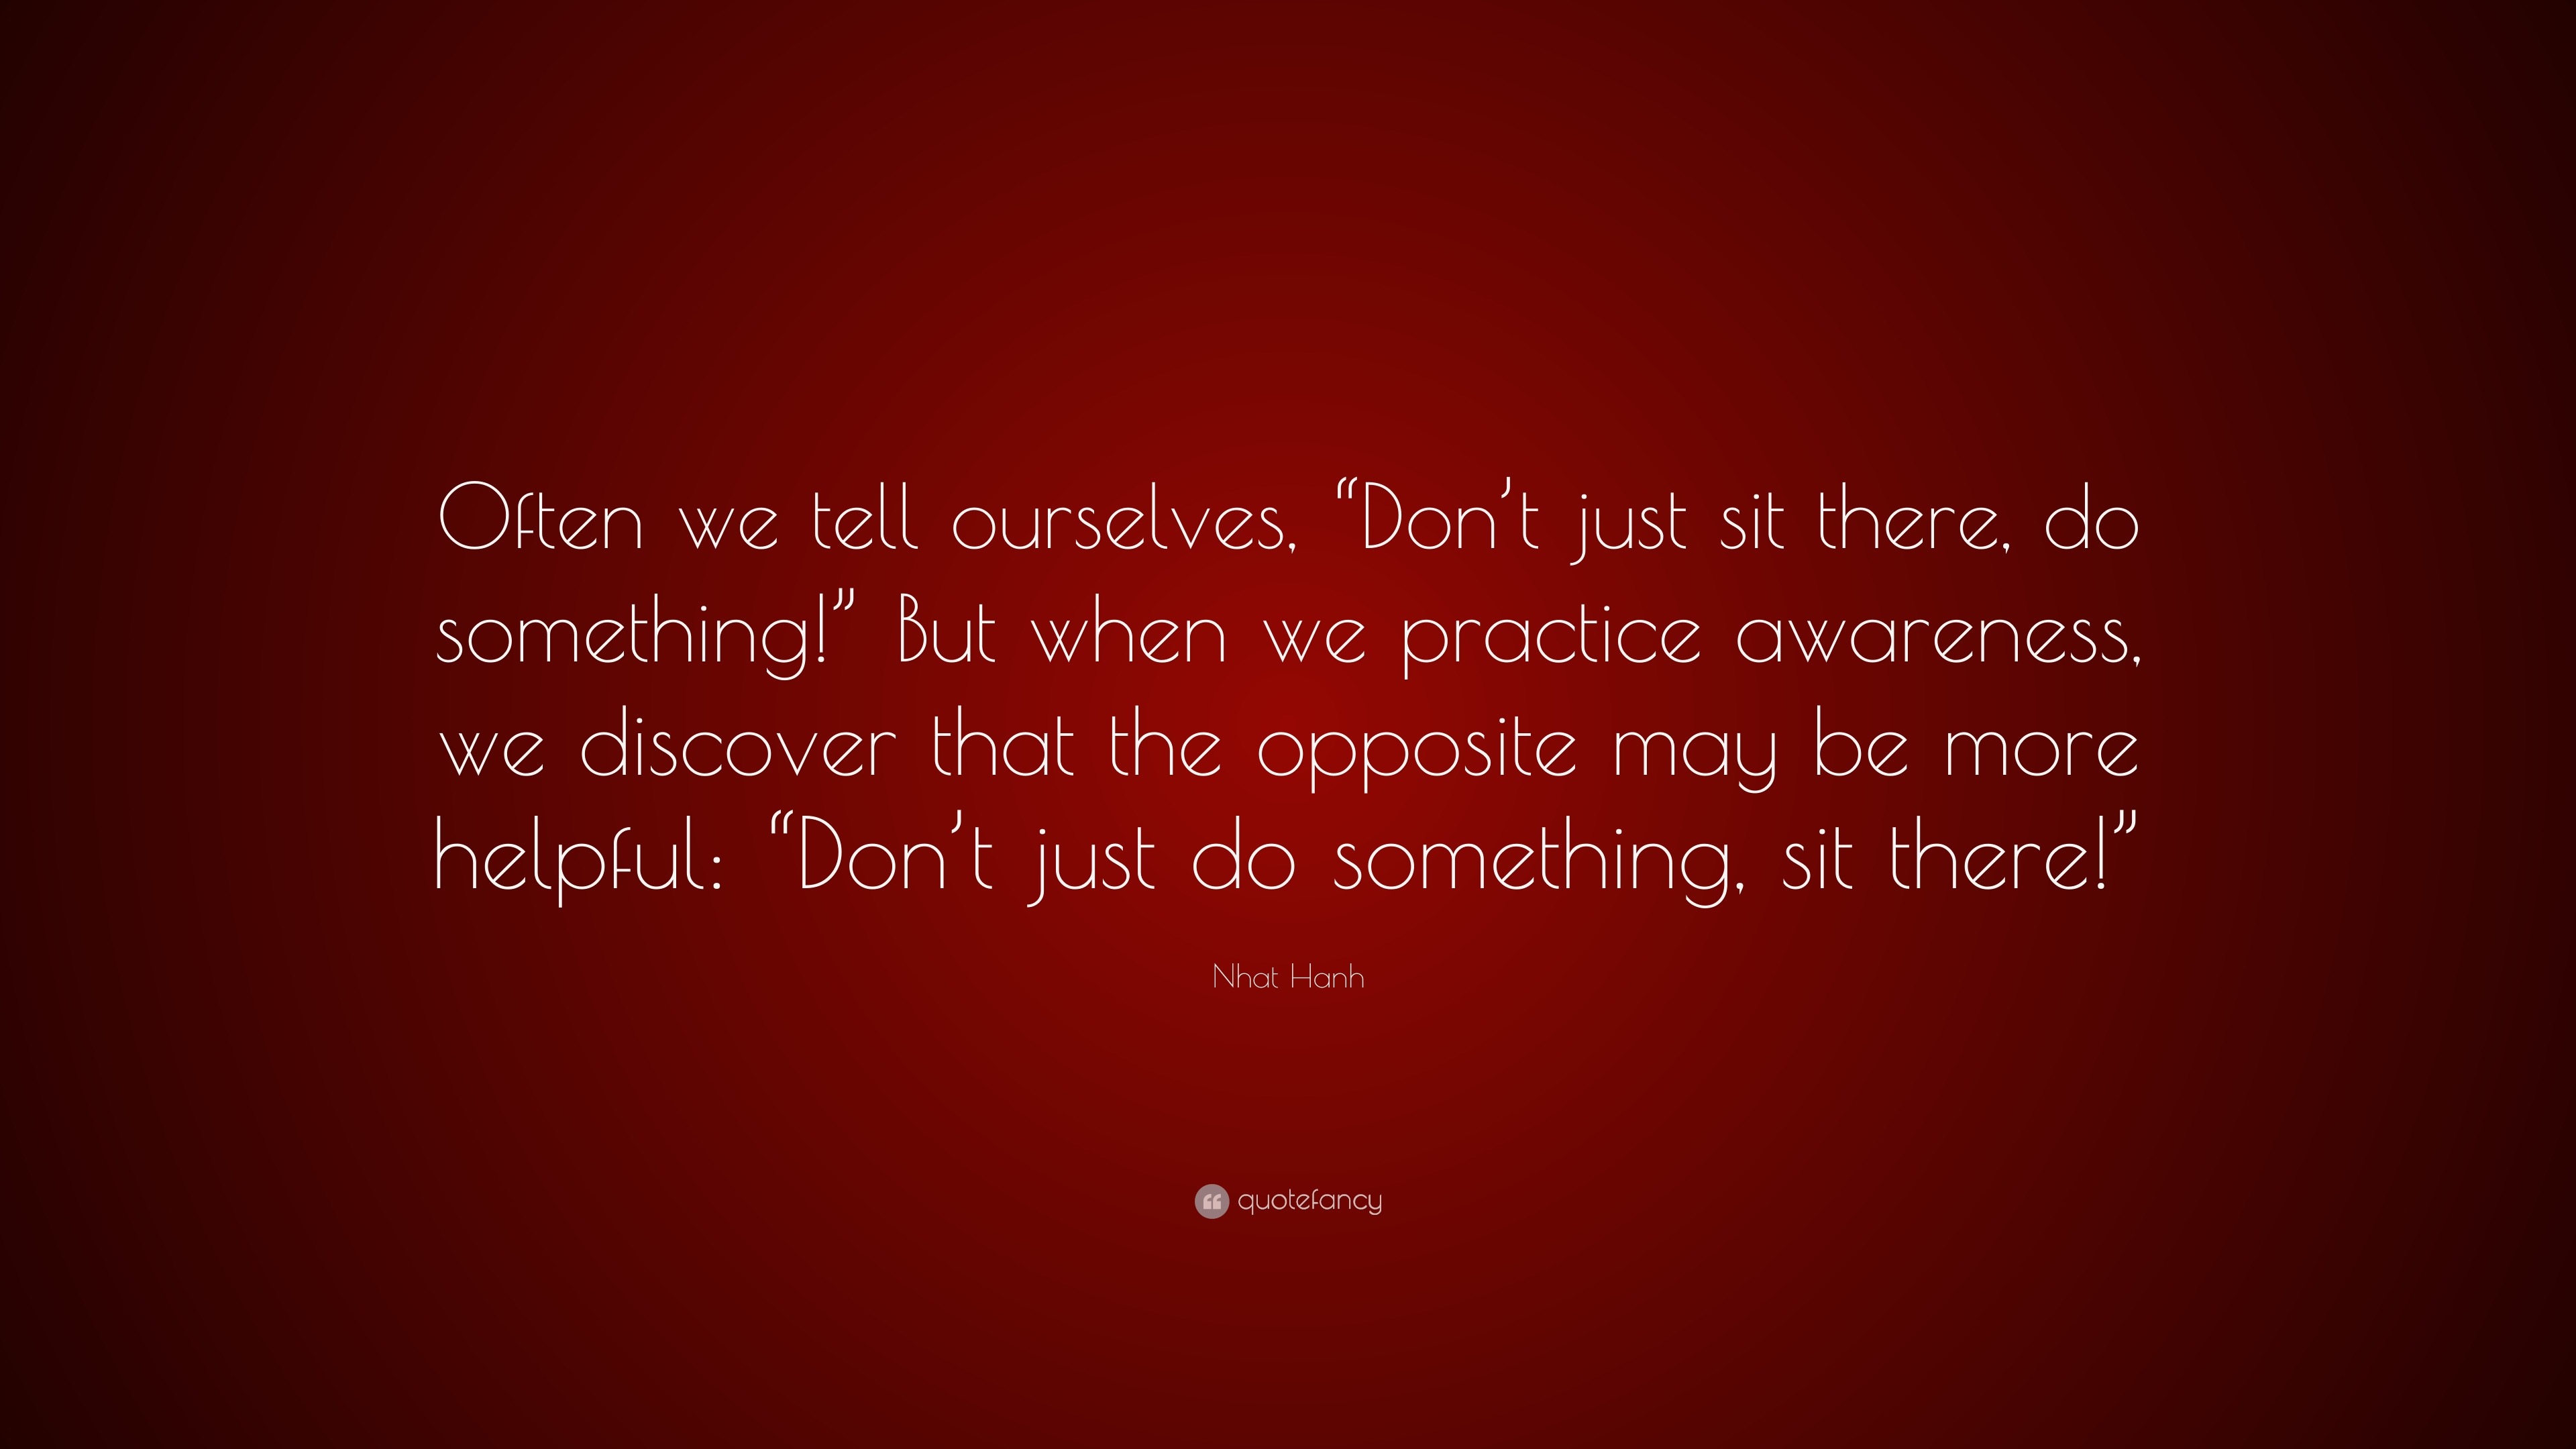 Nhat Hanh Quote: “Often we tell ourselves, “Don’t just sit there, do ...